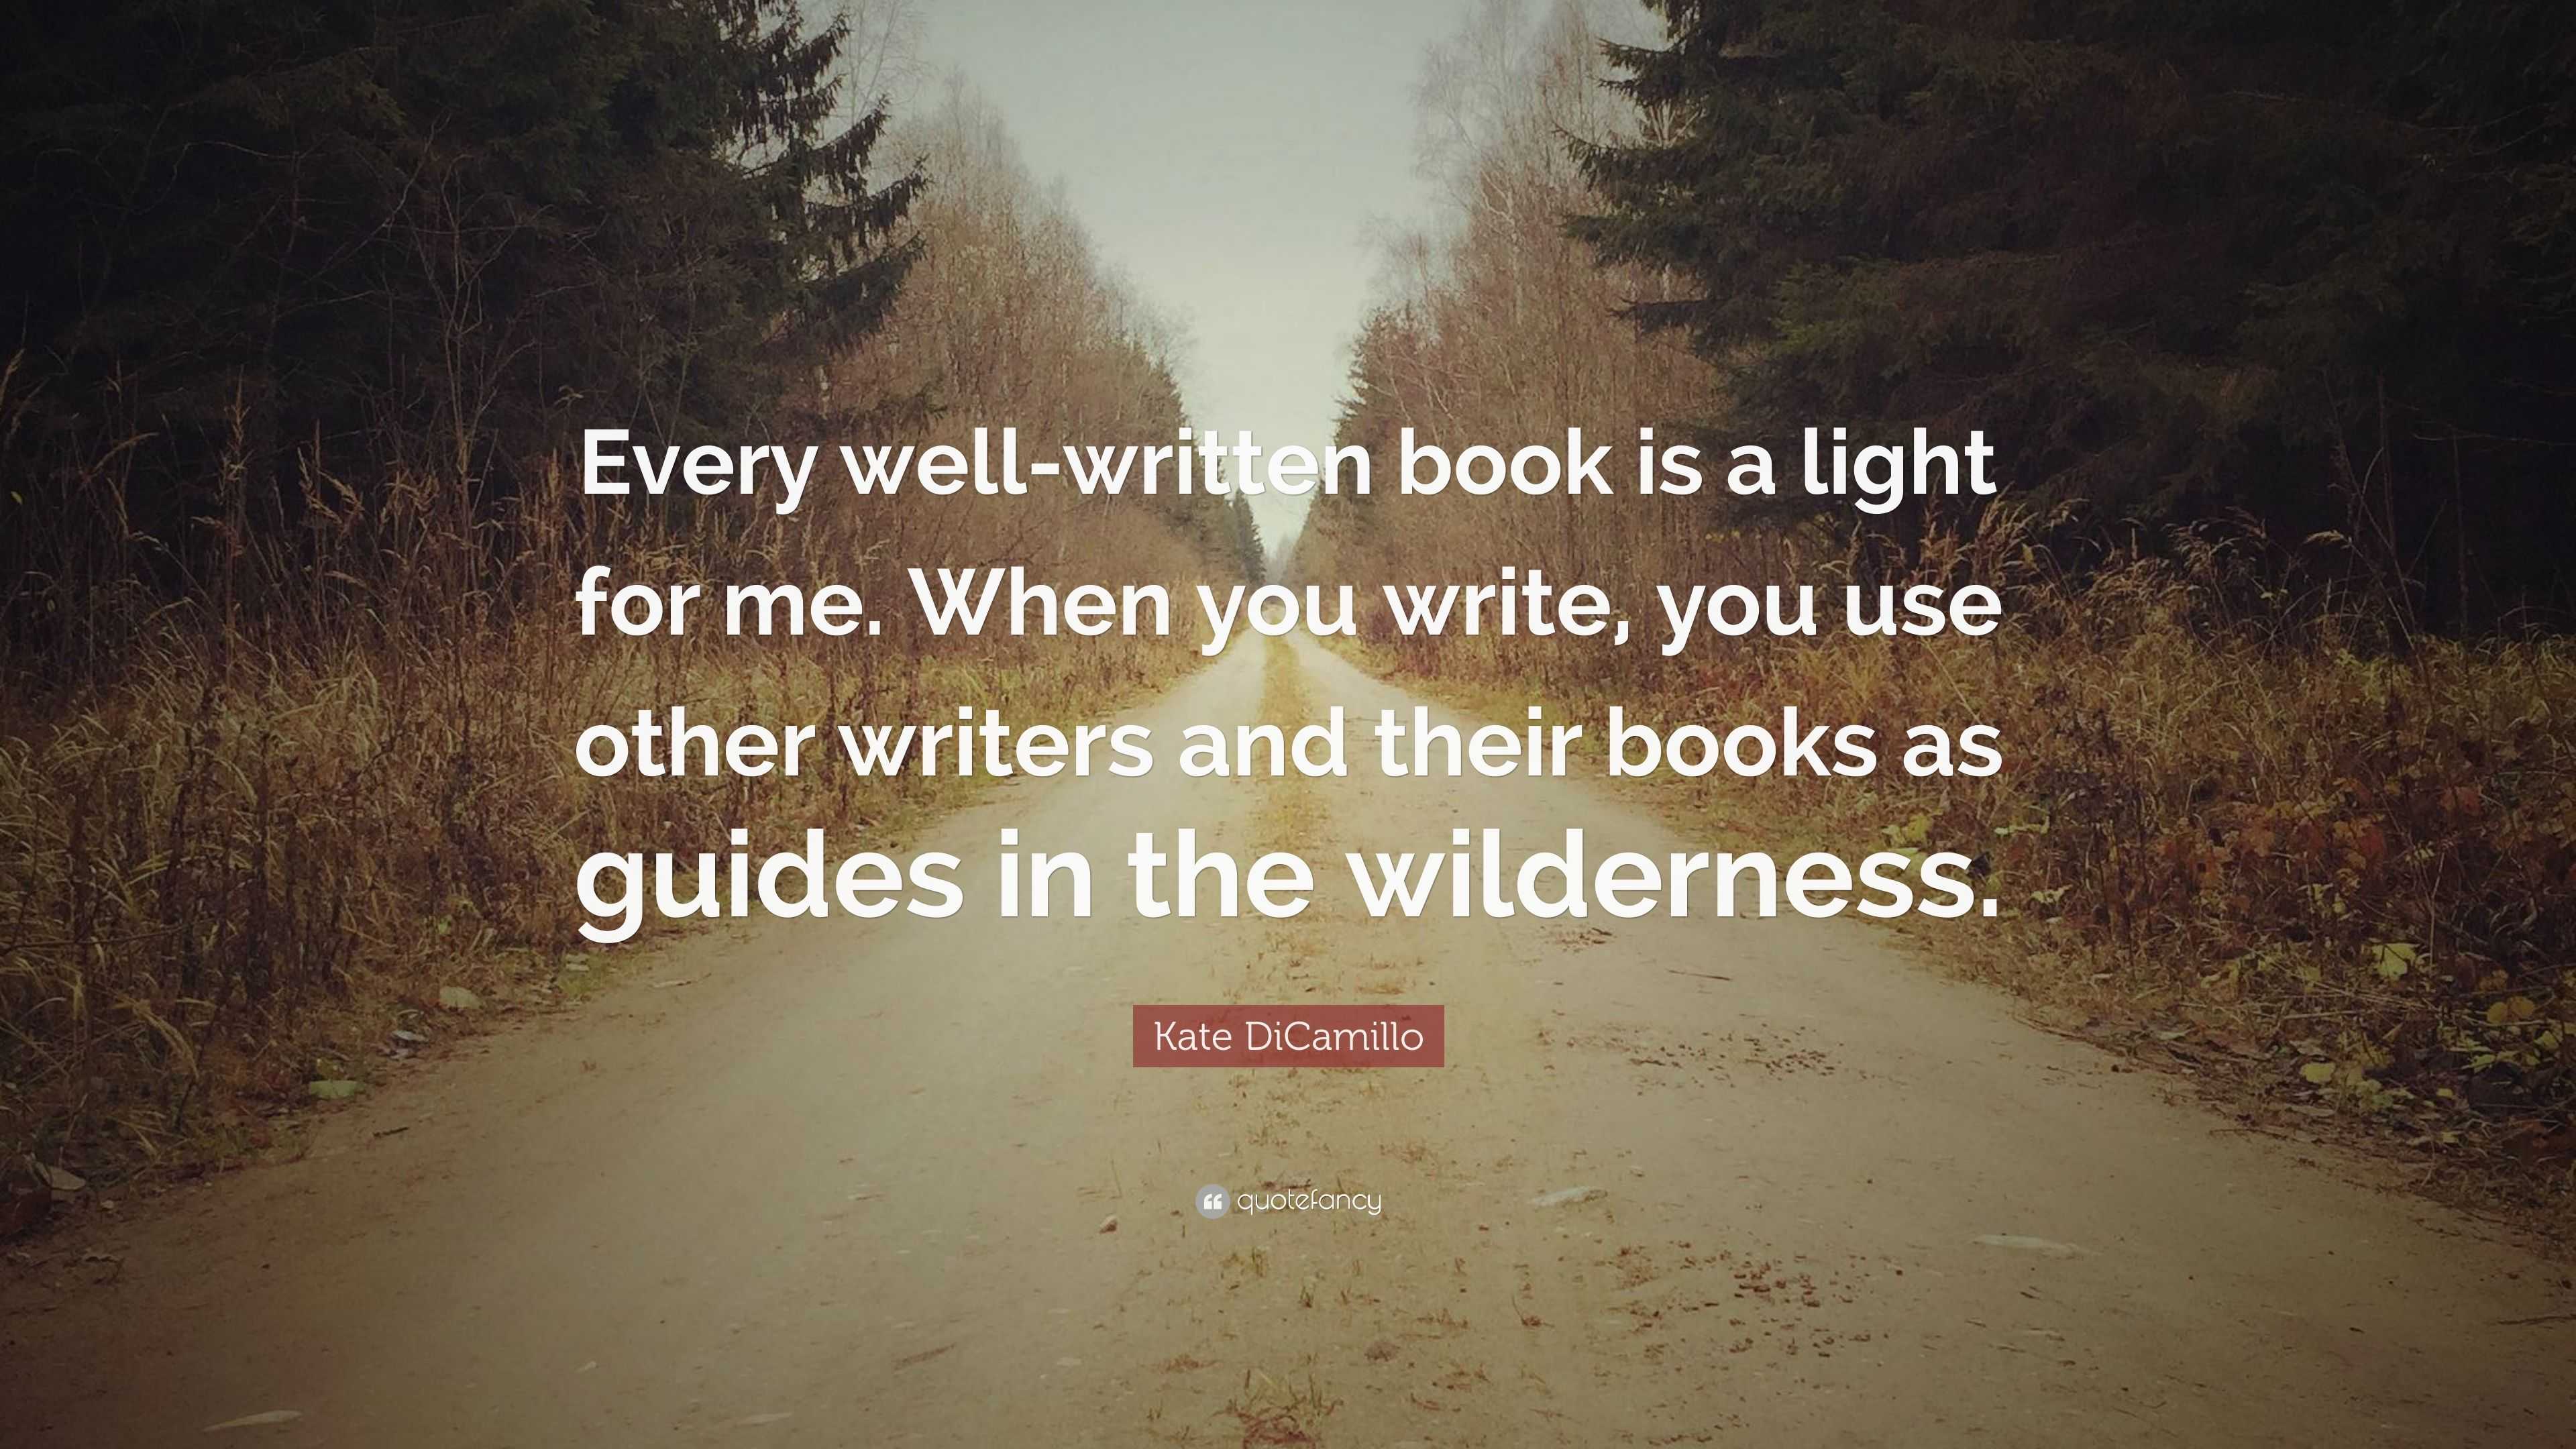 Kate DiCamillo Quote: “Every well-written book is a light for me. When